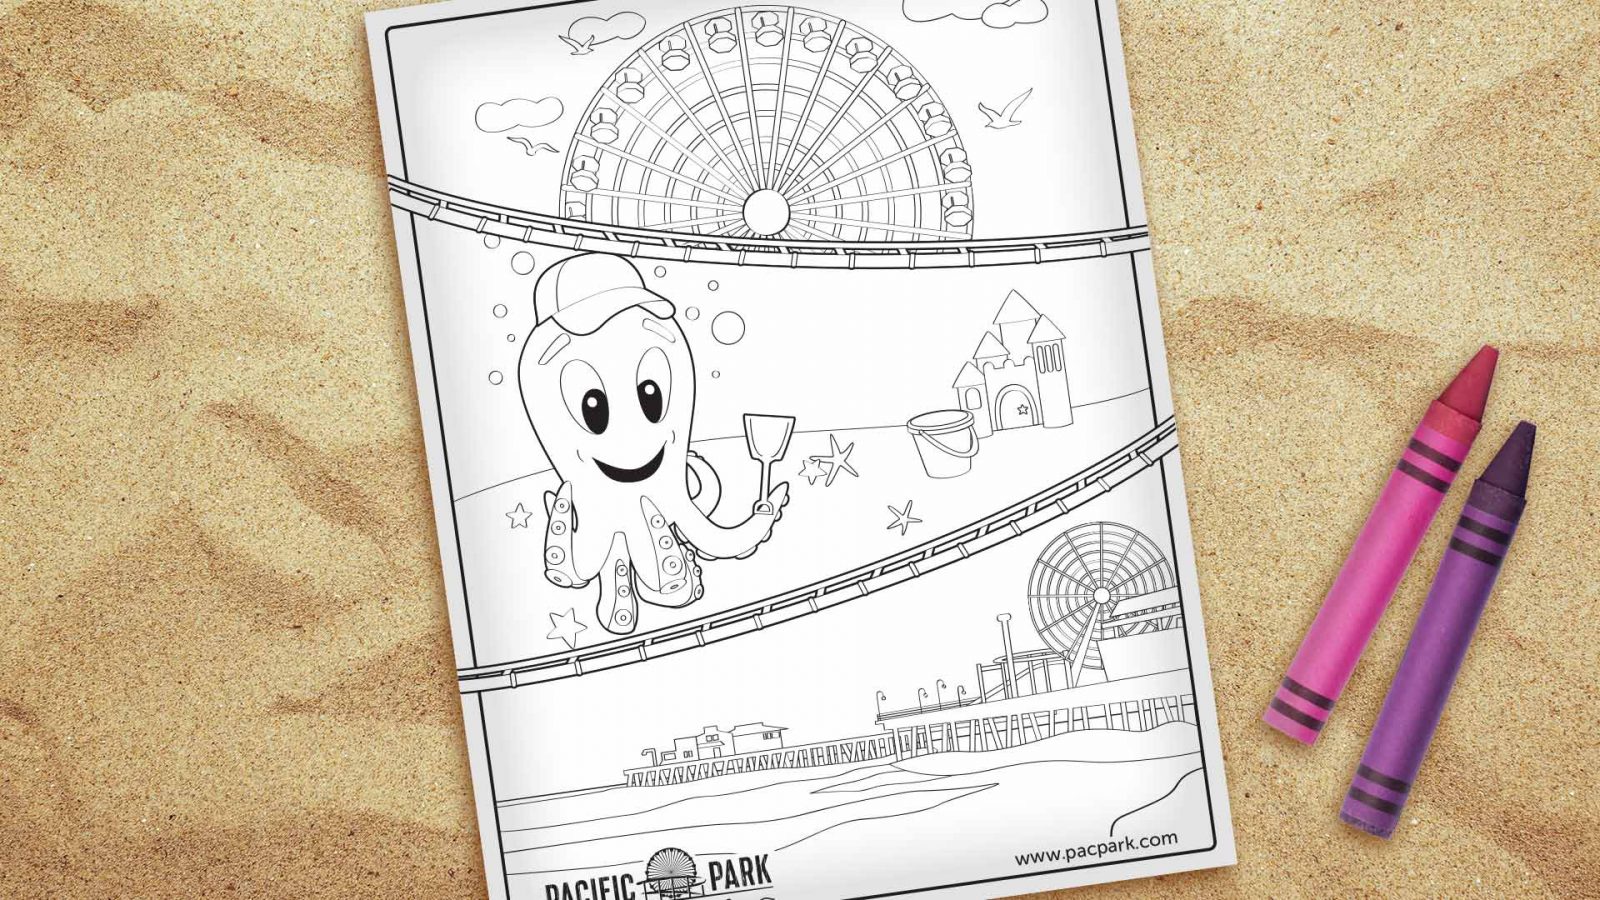 Pacific Park on the Santa Monica Pier Coloring Page